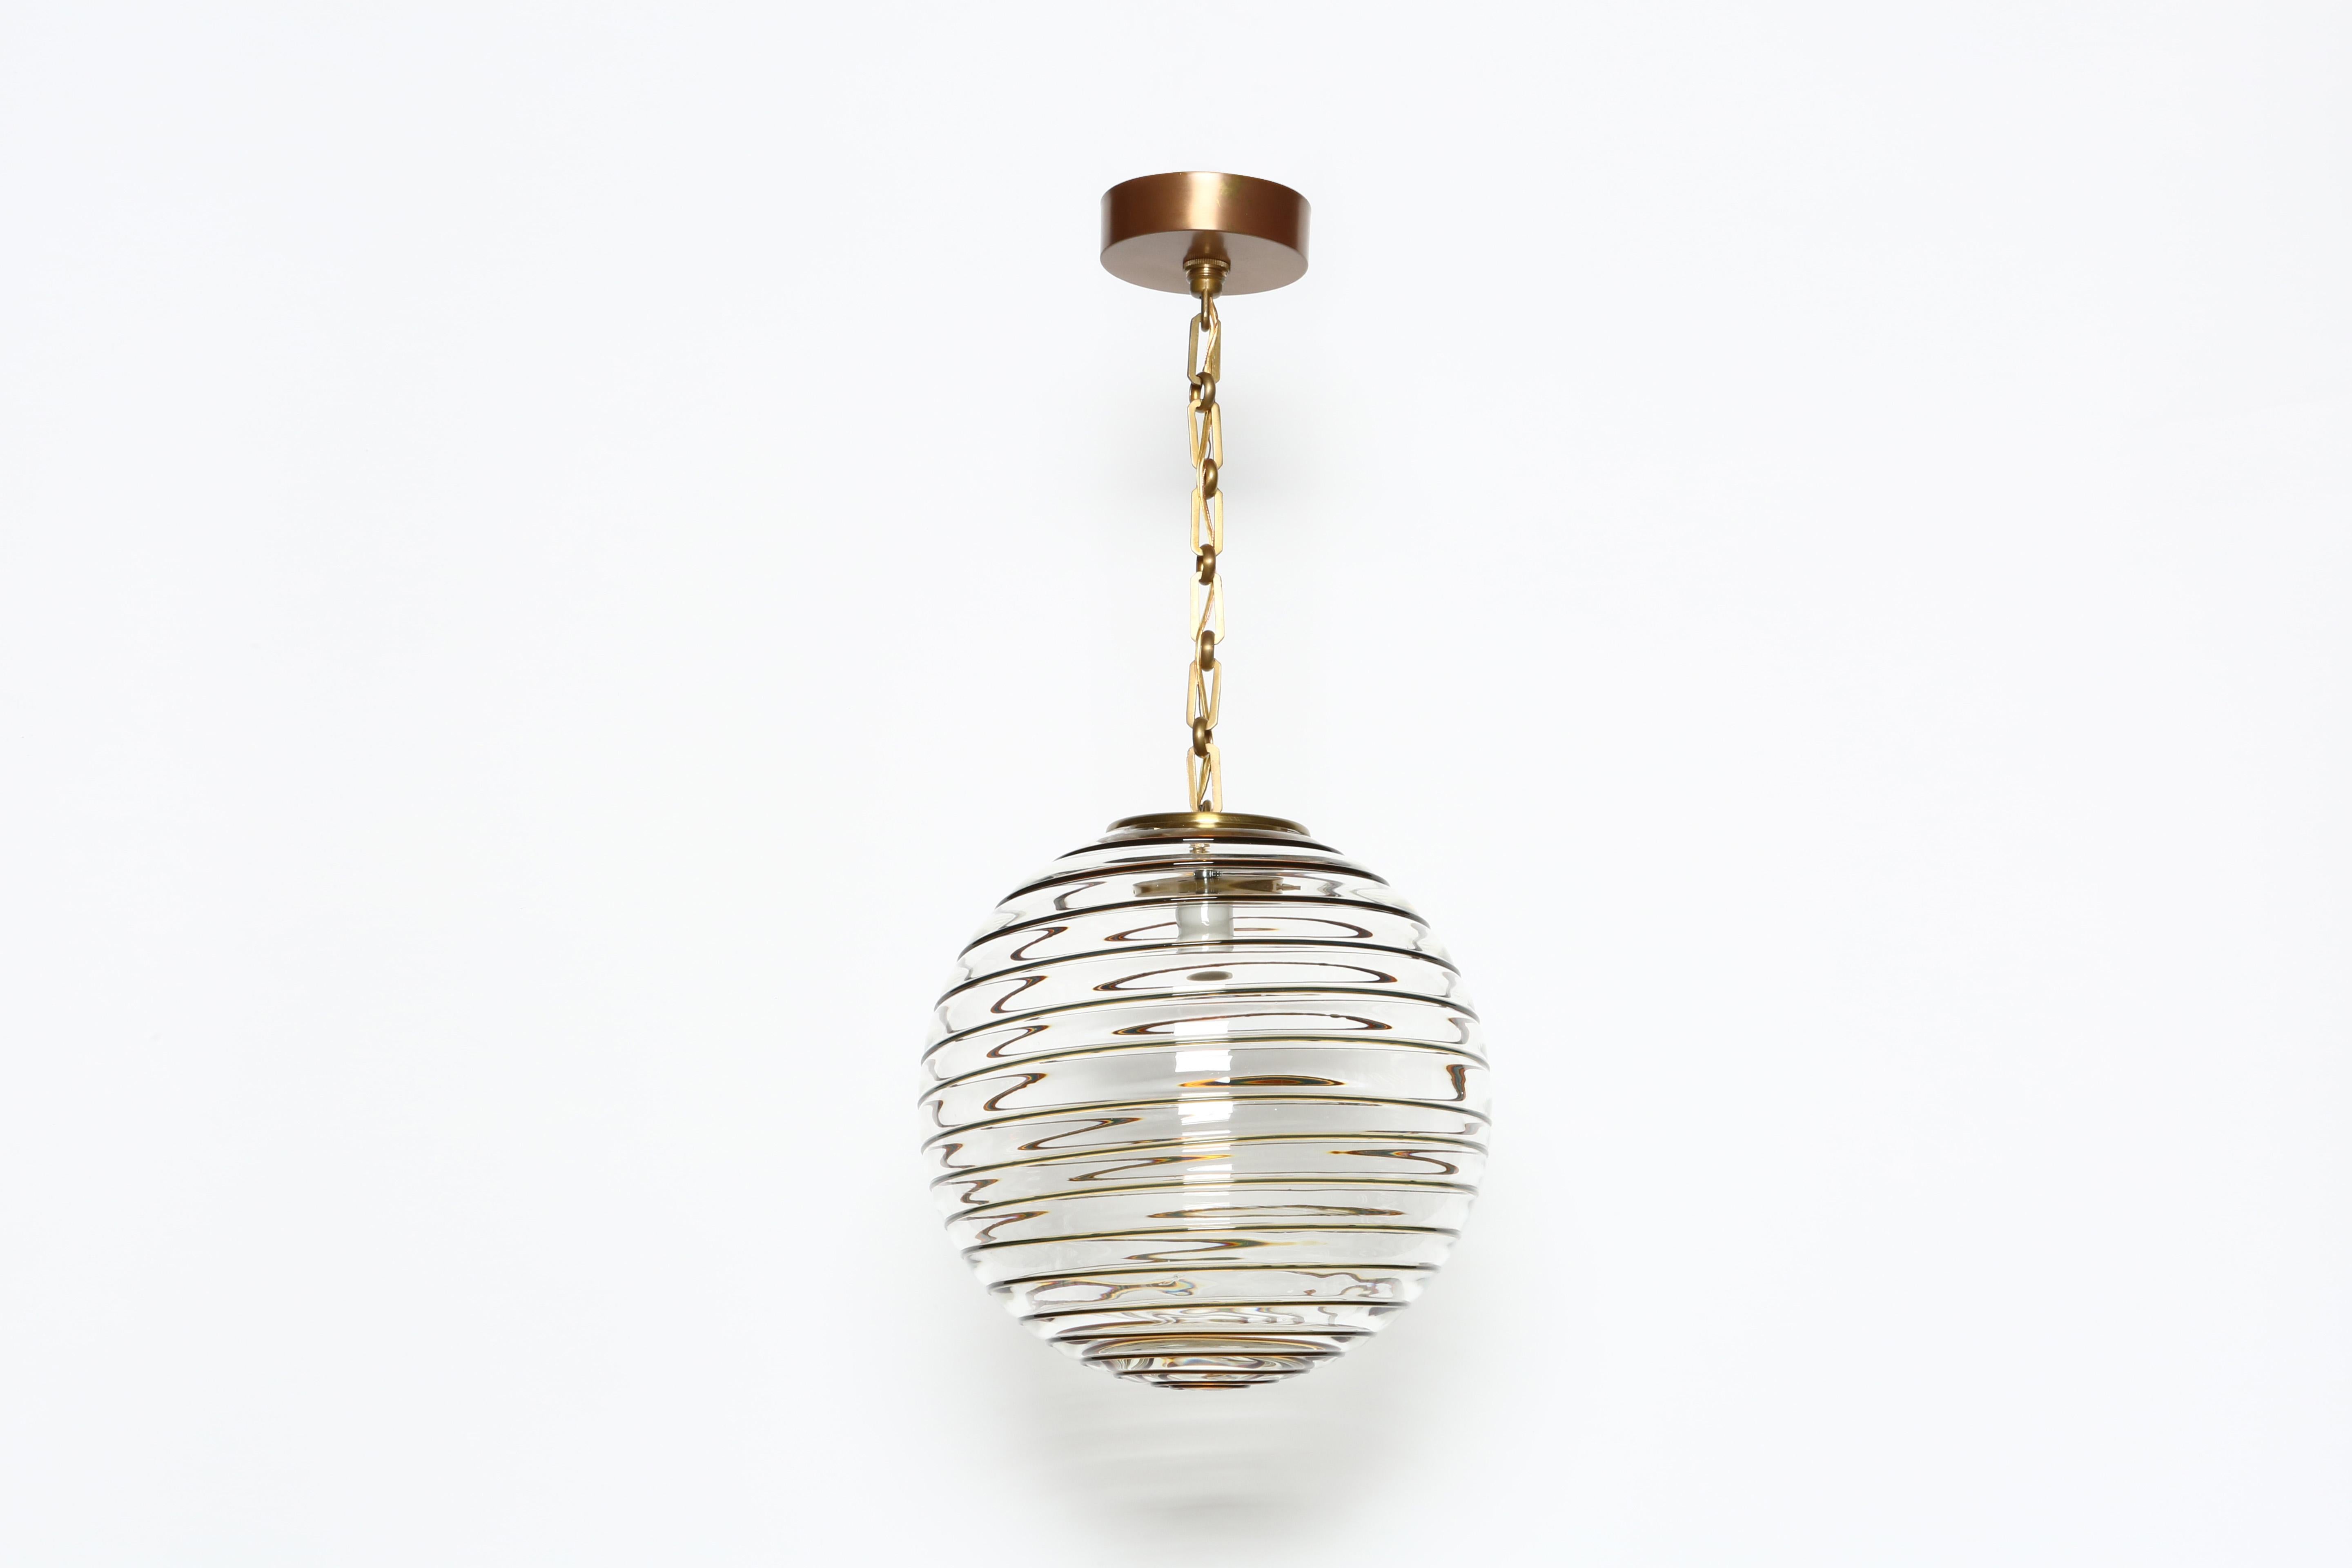 Murano ceiling pendant.
Italy, 1960s.
Rewired for US.
Height adjustable.